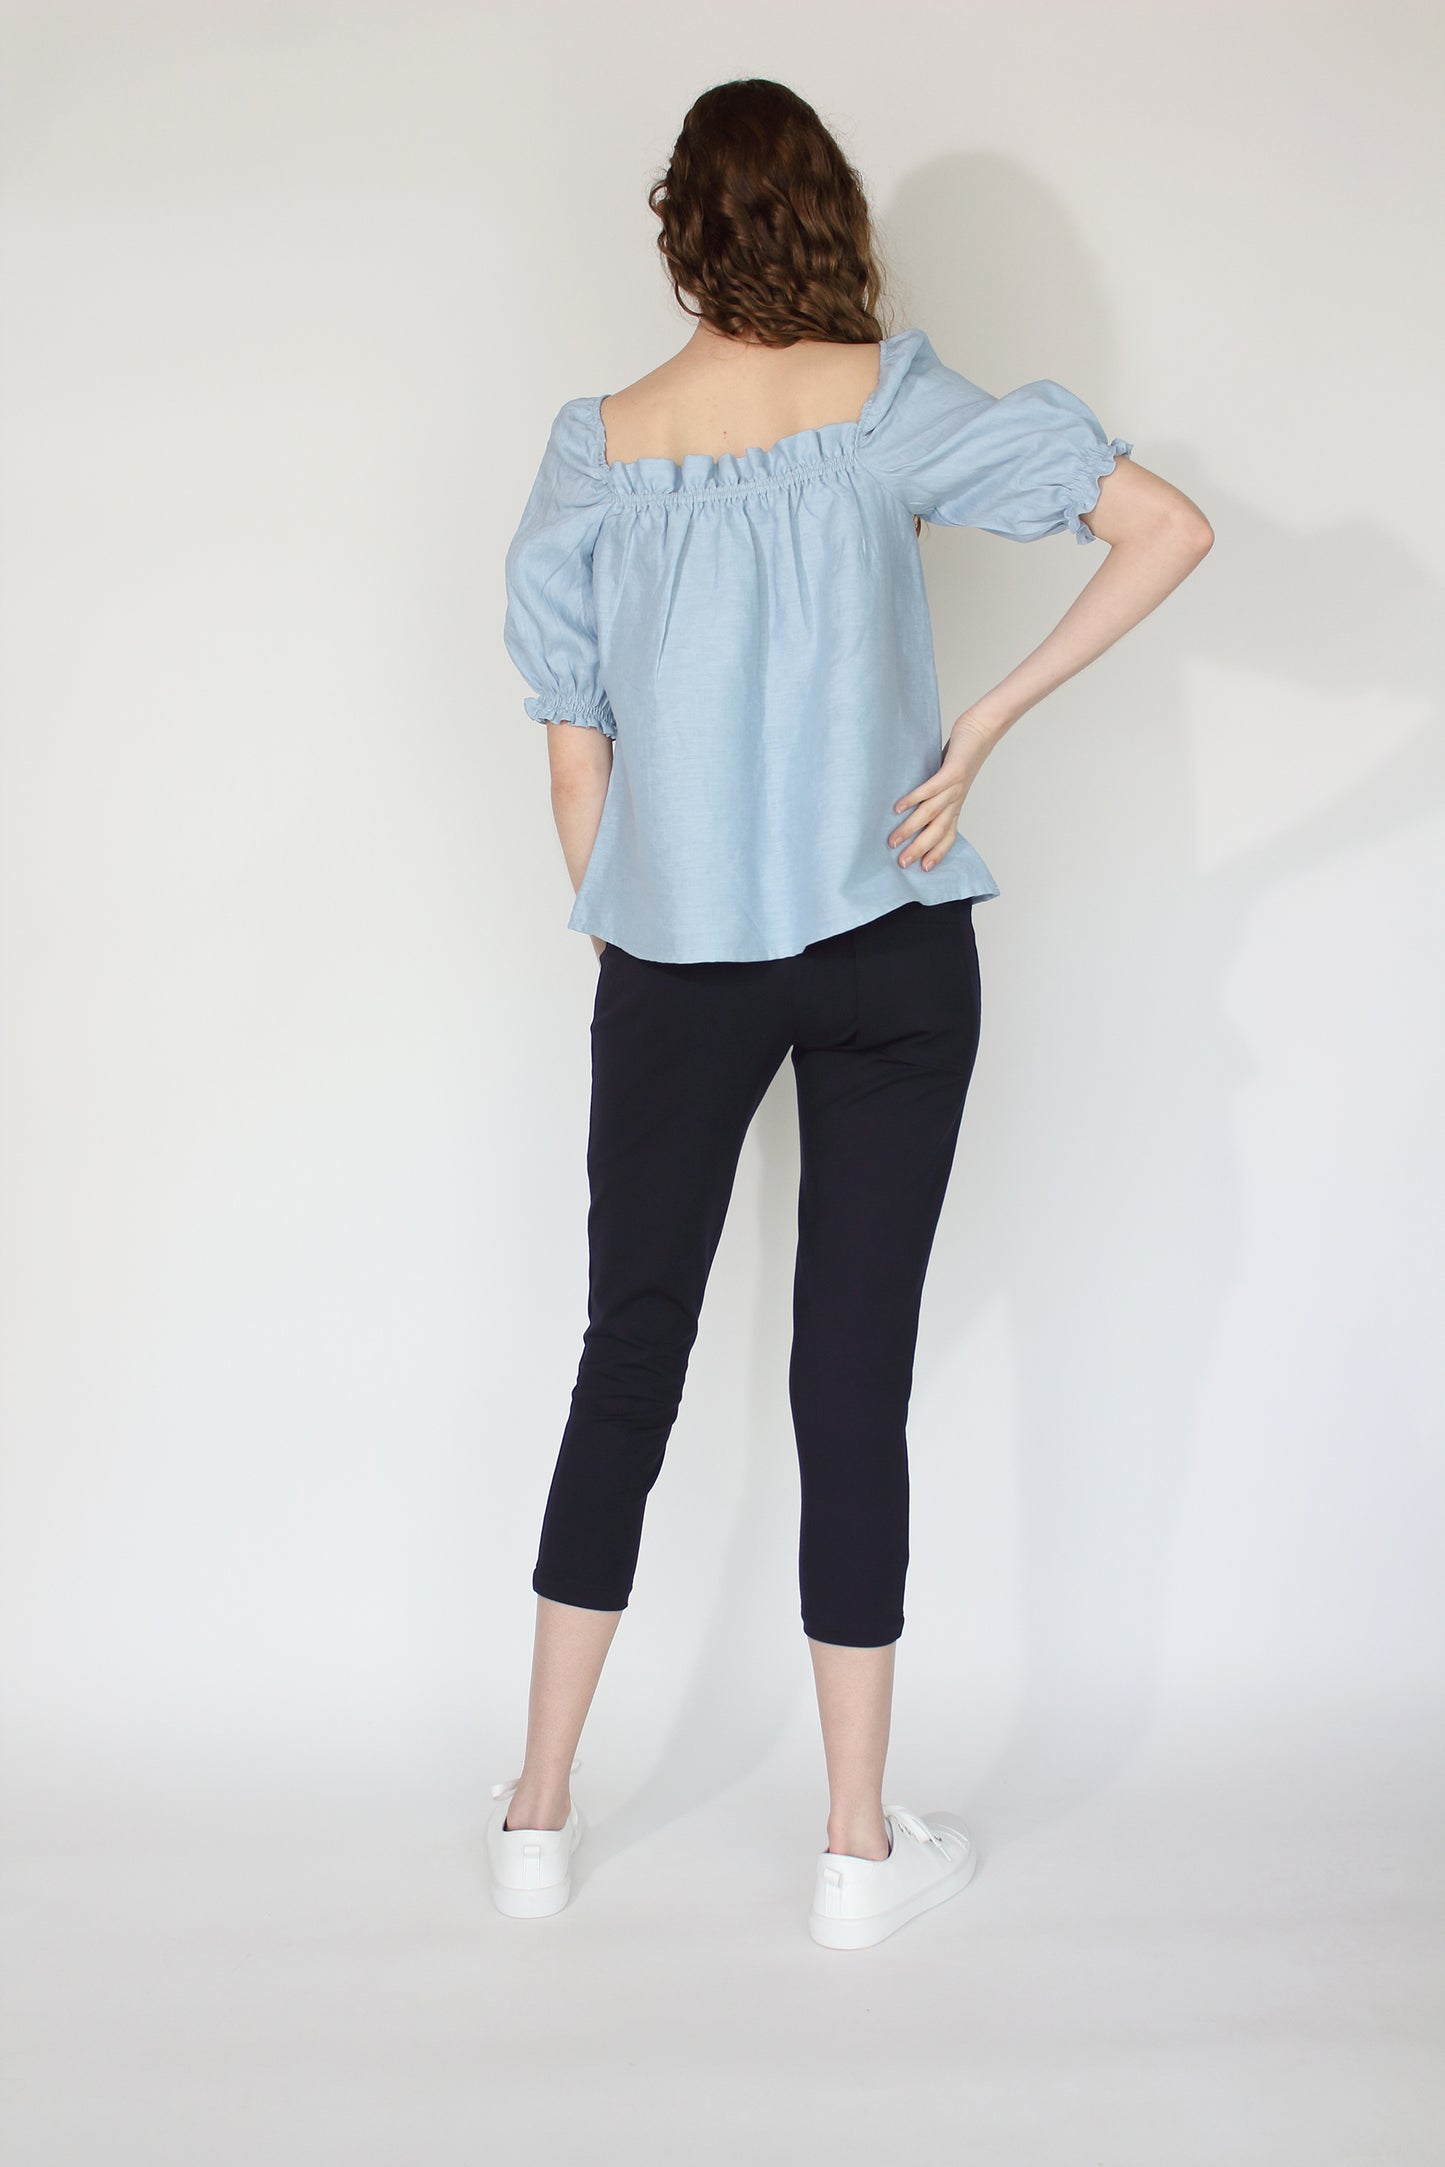 Jaclyn M Evie Linen Blouse | Chambray